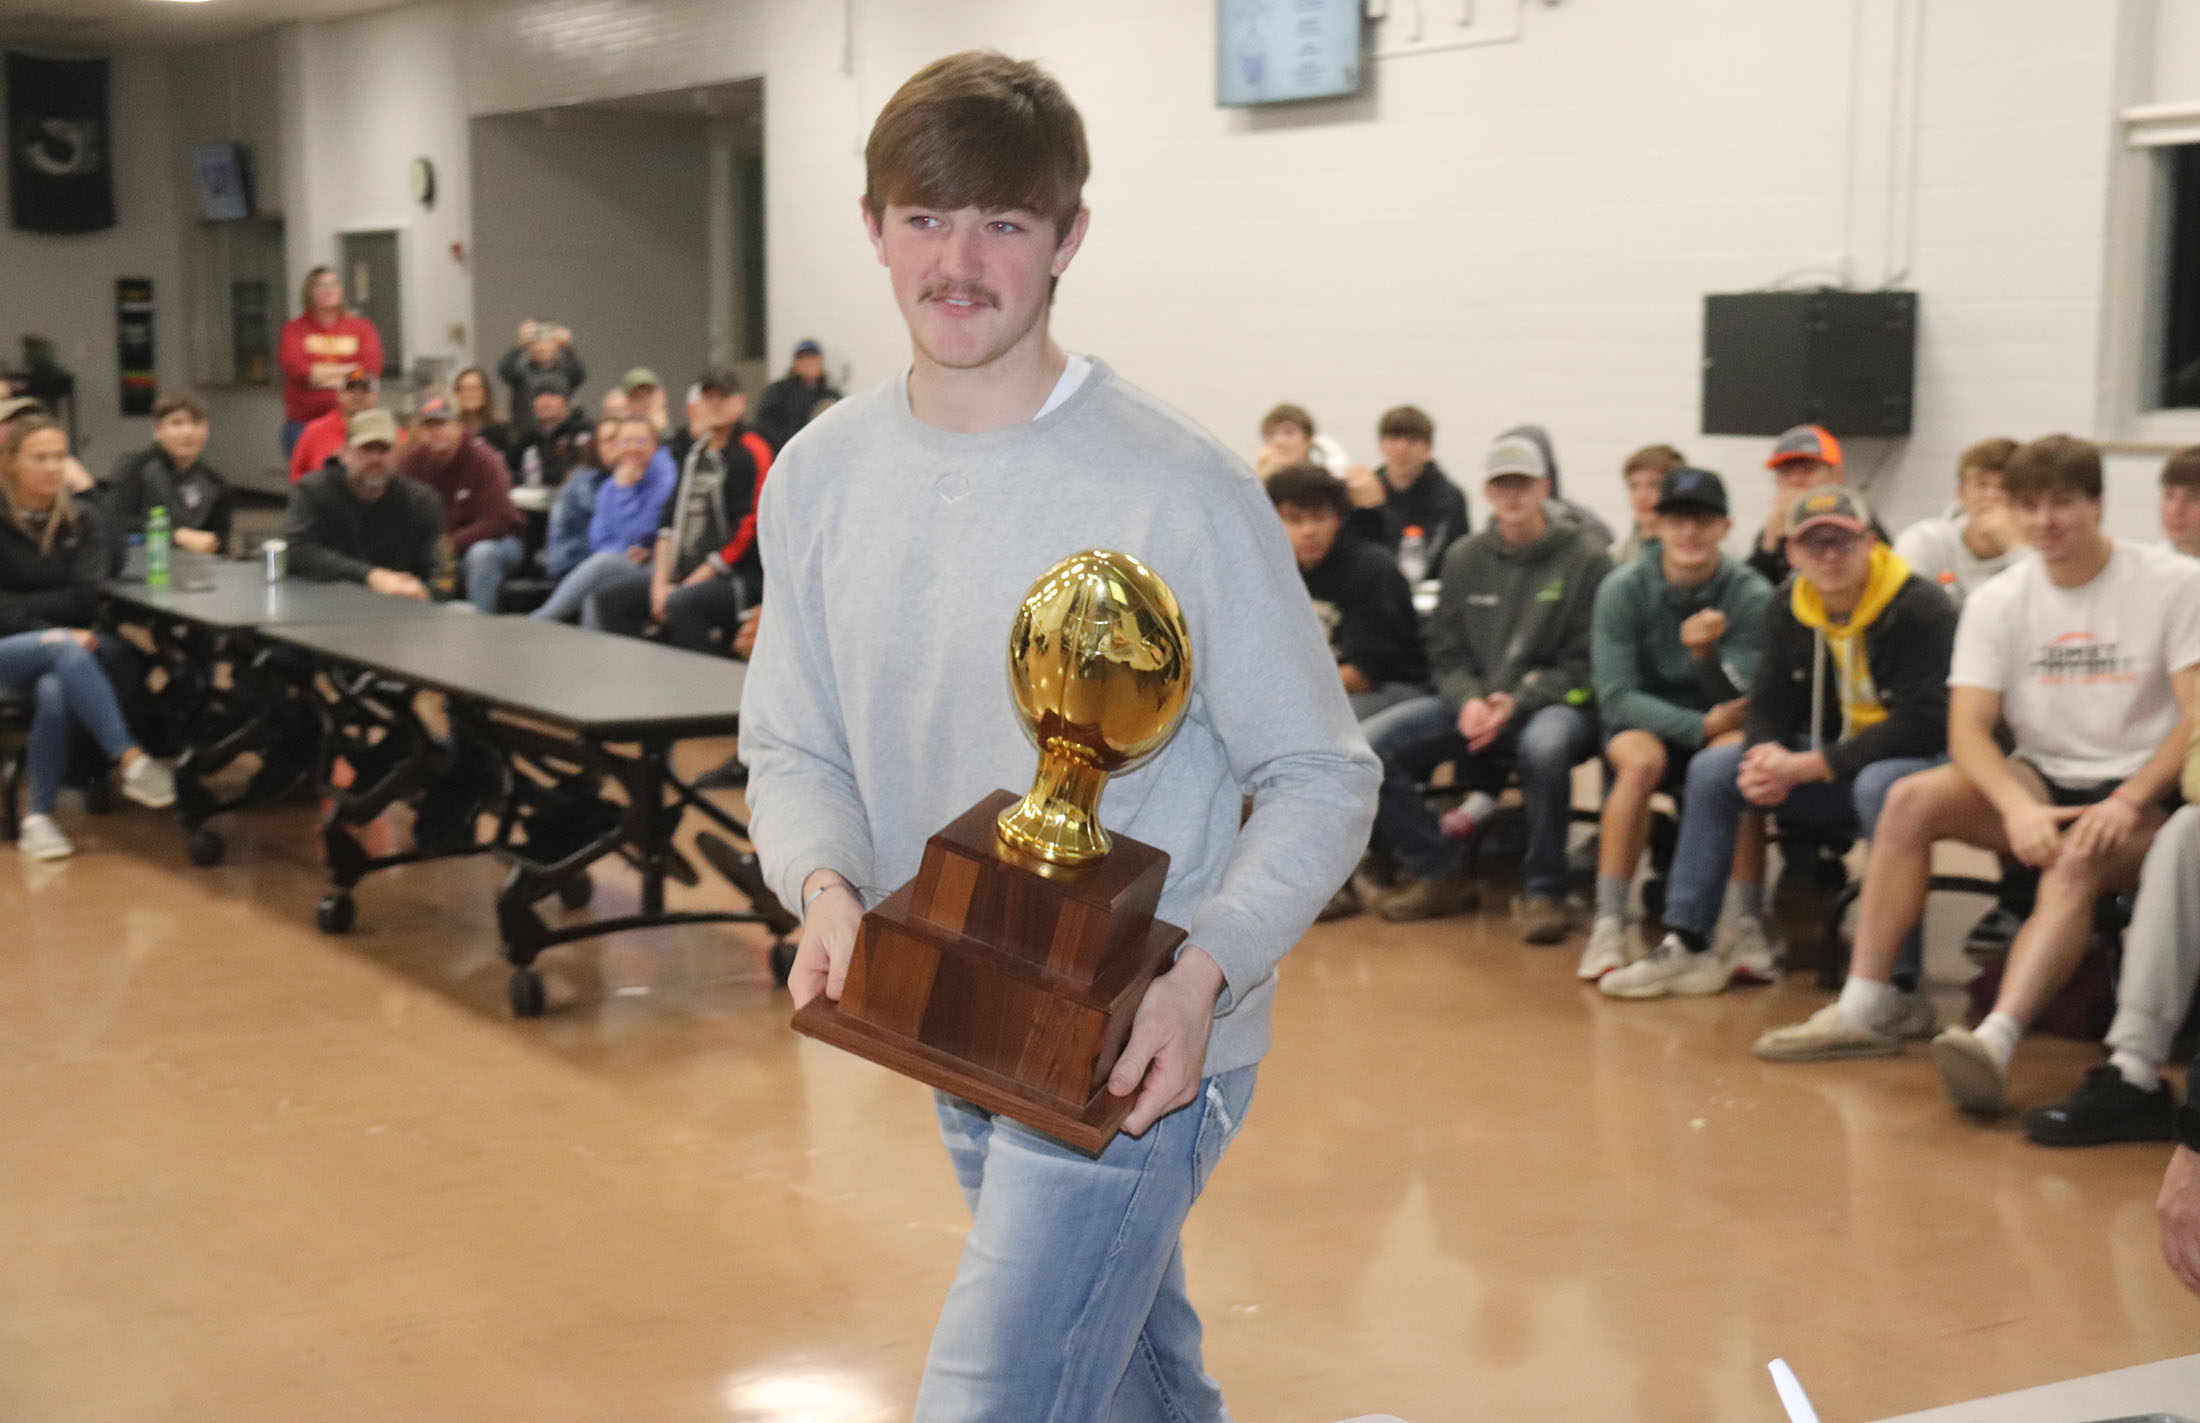 Comet football players feted at annual awards banquet